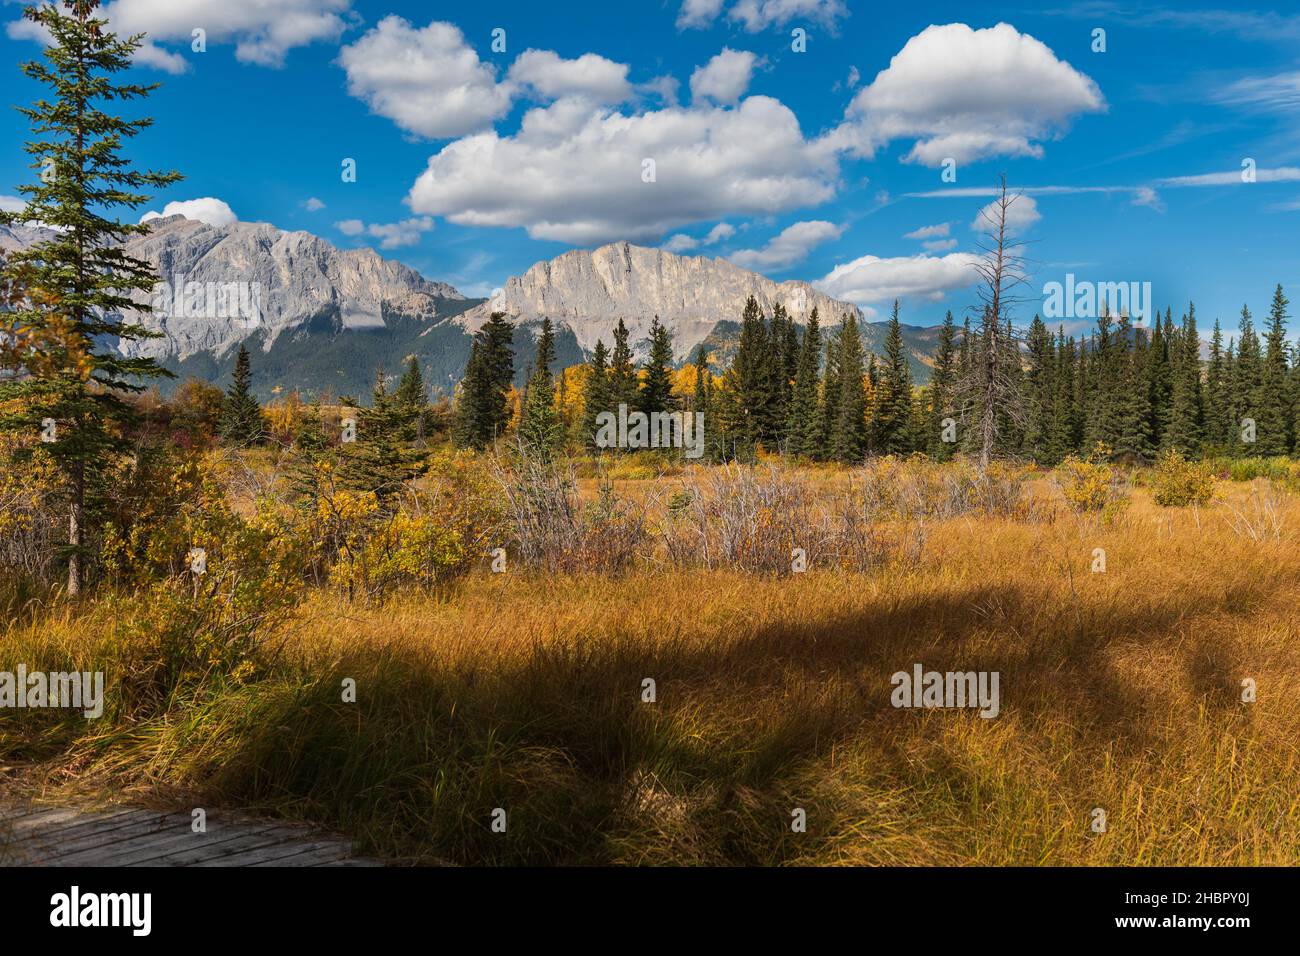 Fall landscapes in the foothills of the canadian rocky mountains Stock Photo